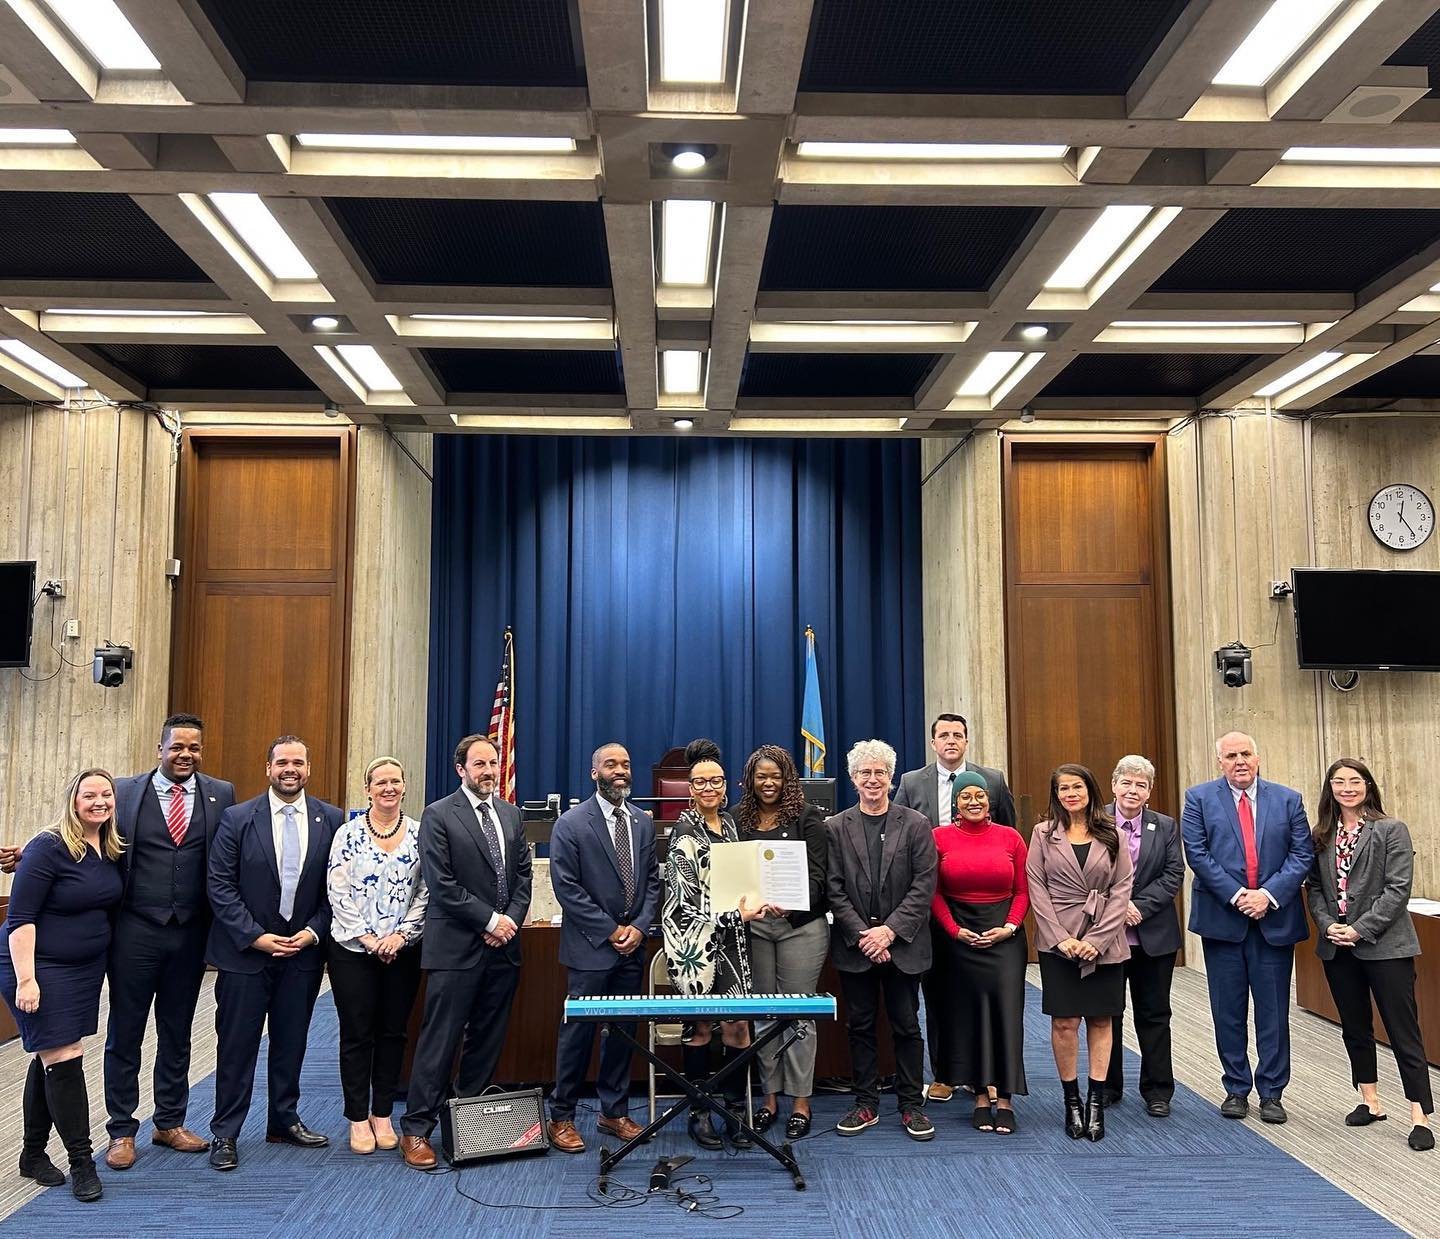 On Wednesday, the @bostoncitycouncil officially recognized April 30th as International Jazz Day, highlighting Boston&rsquo;s rich jazz history and vibrant presence. Originating from African American communities in the late 19th and early 20th centuri